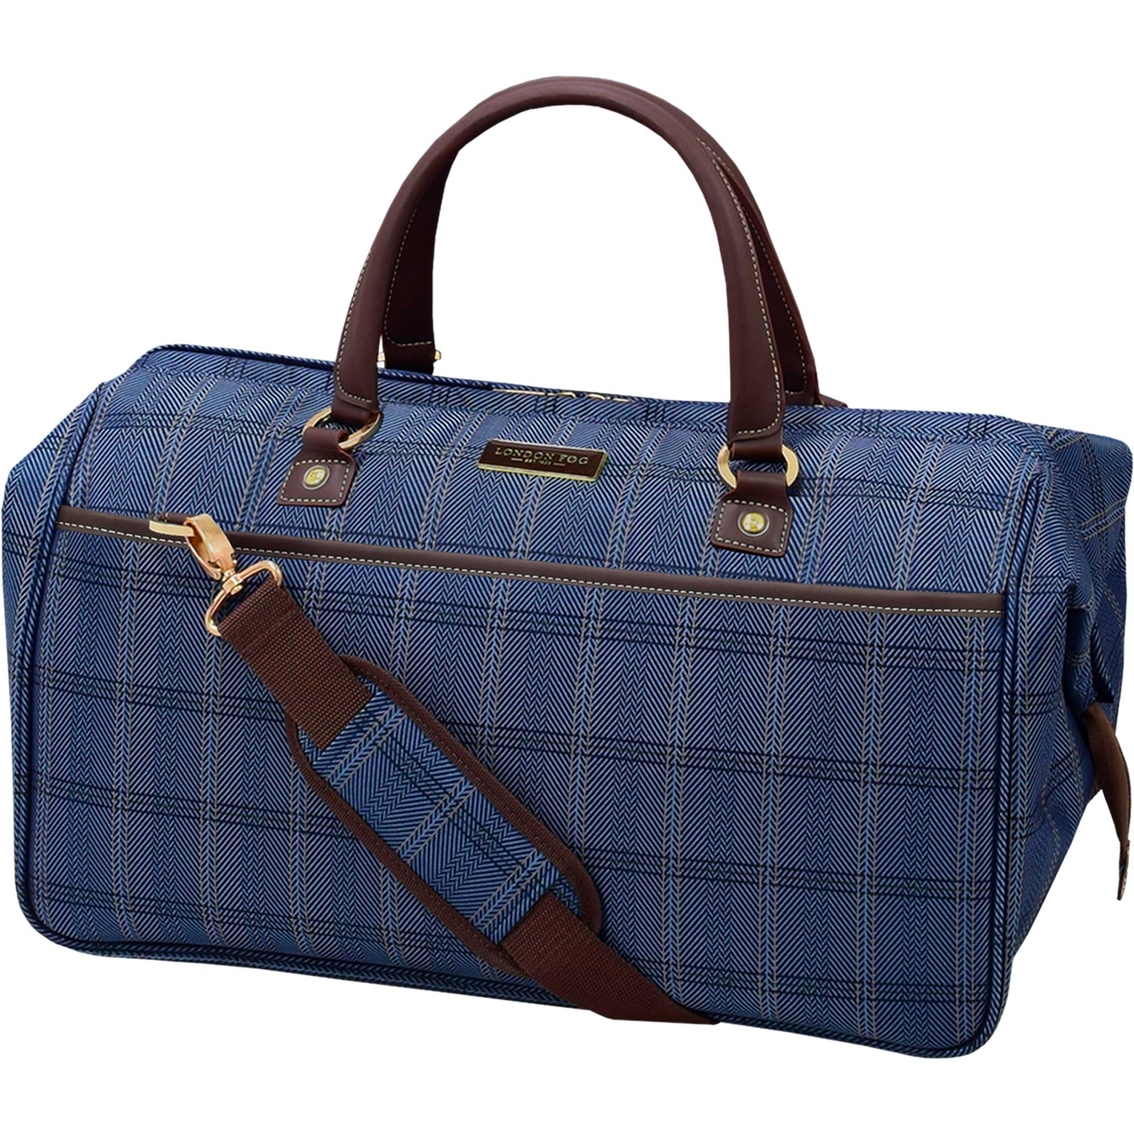 London Fog Brentwood II 20 in. Wide Mouth Duffle - Image 1 of 3